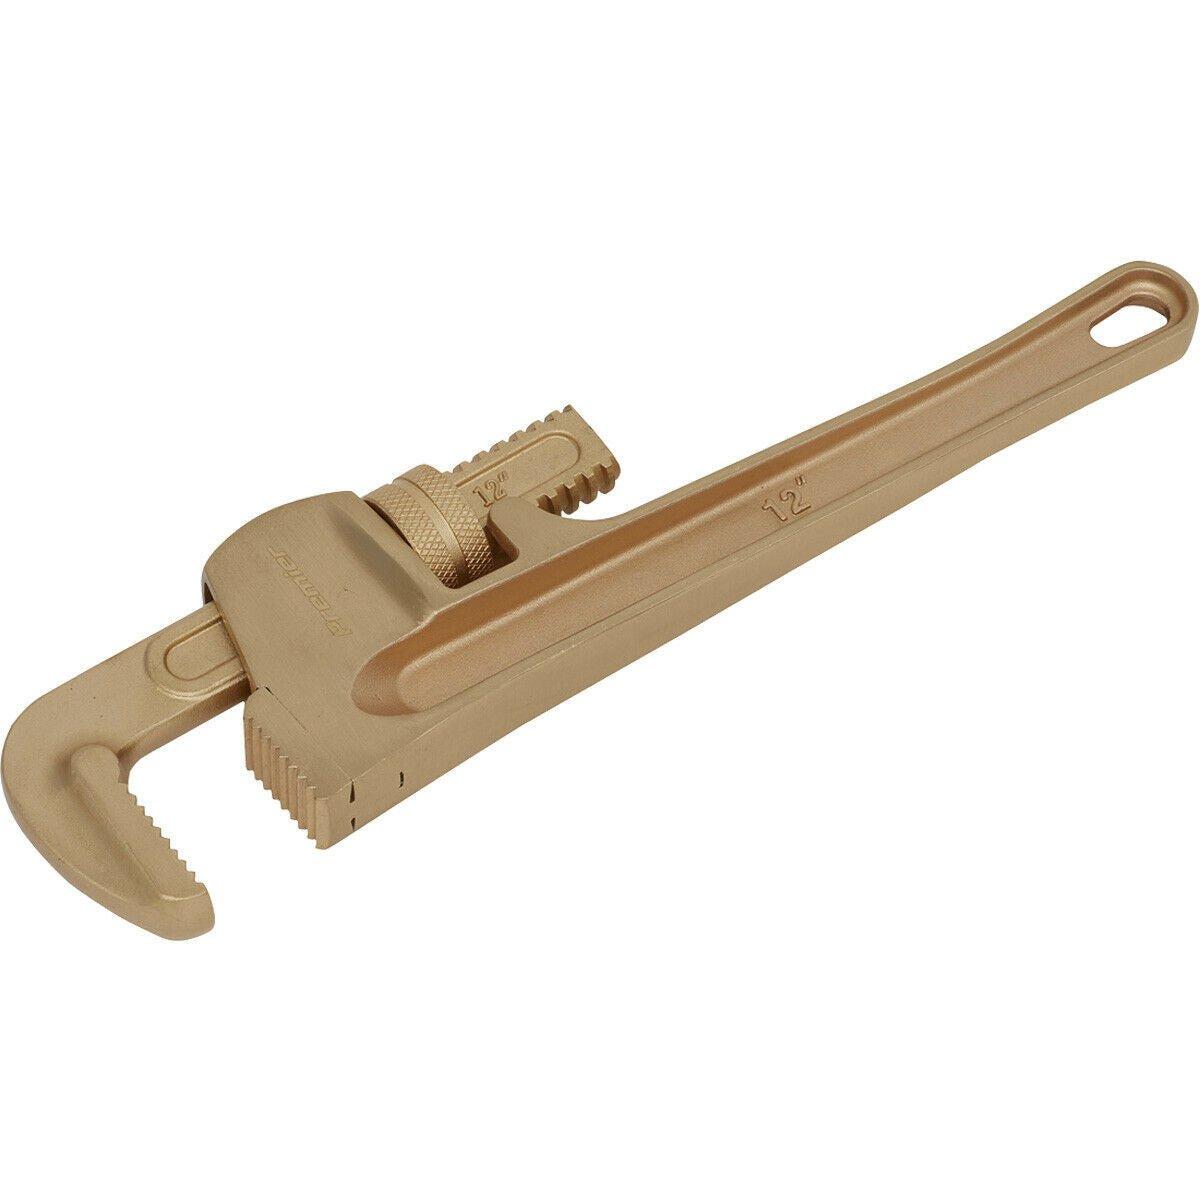 300mm Non-Sparking Adjustable Pipe Wrench - 60mm Jaw Capacity - Beryllium Copper